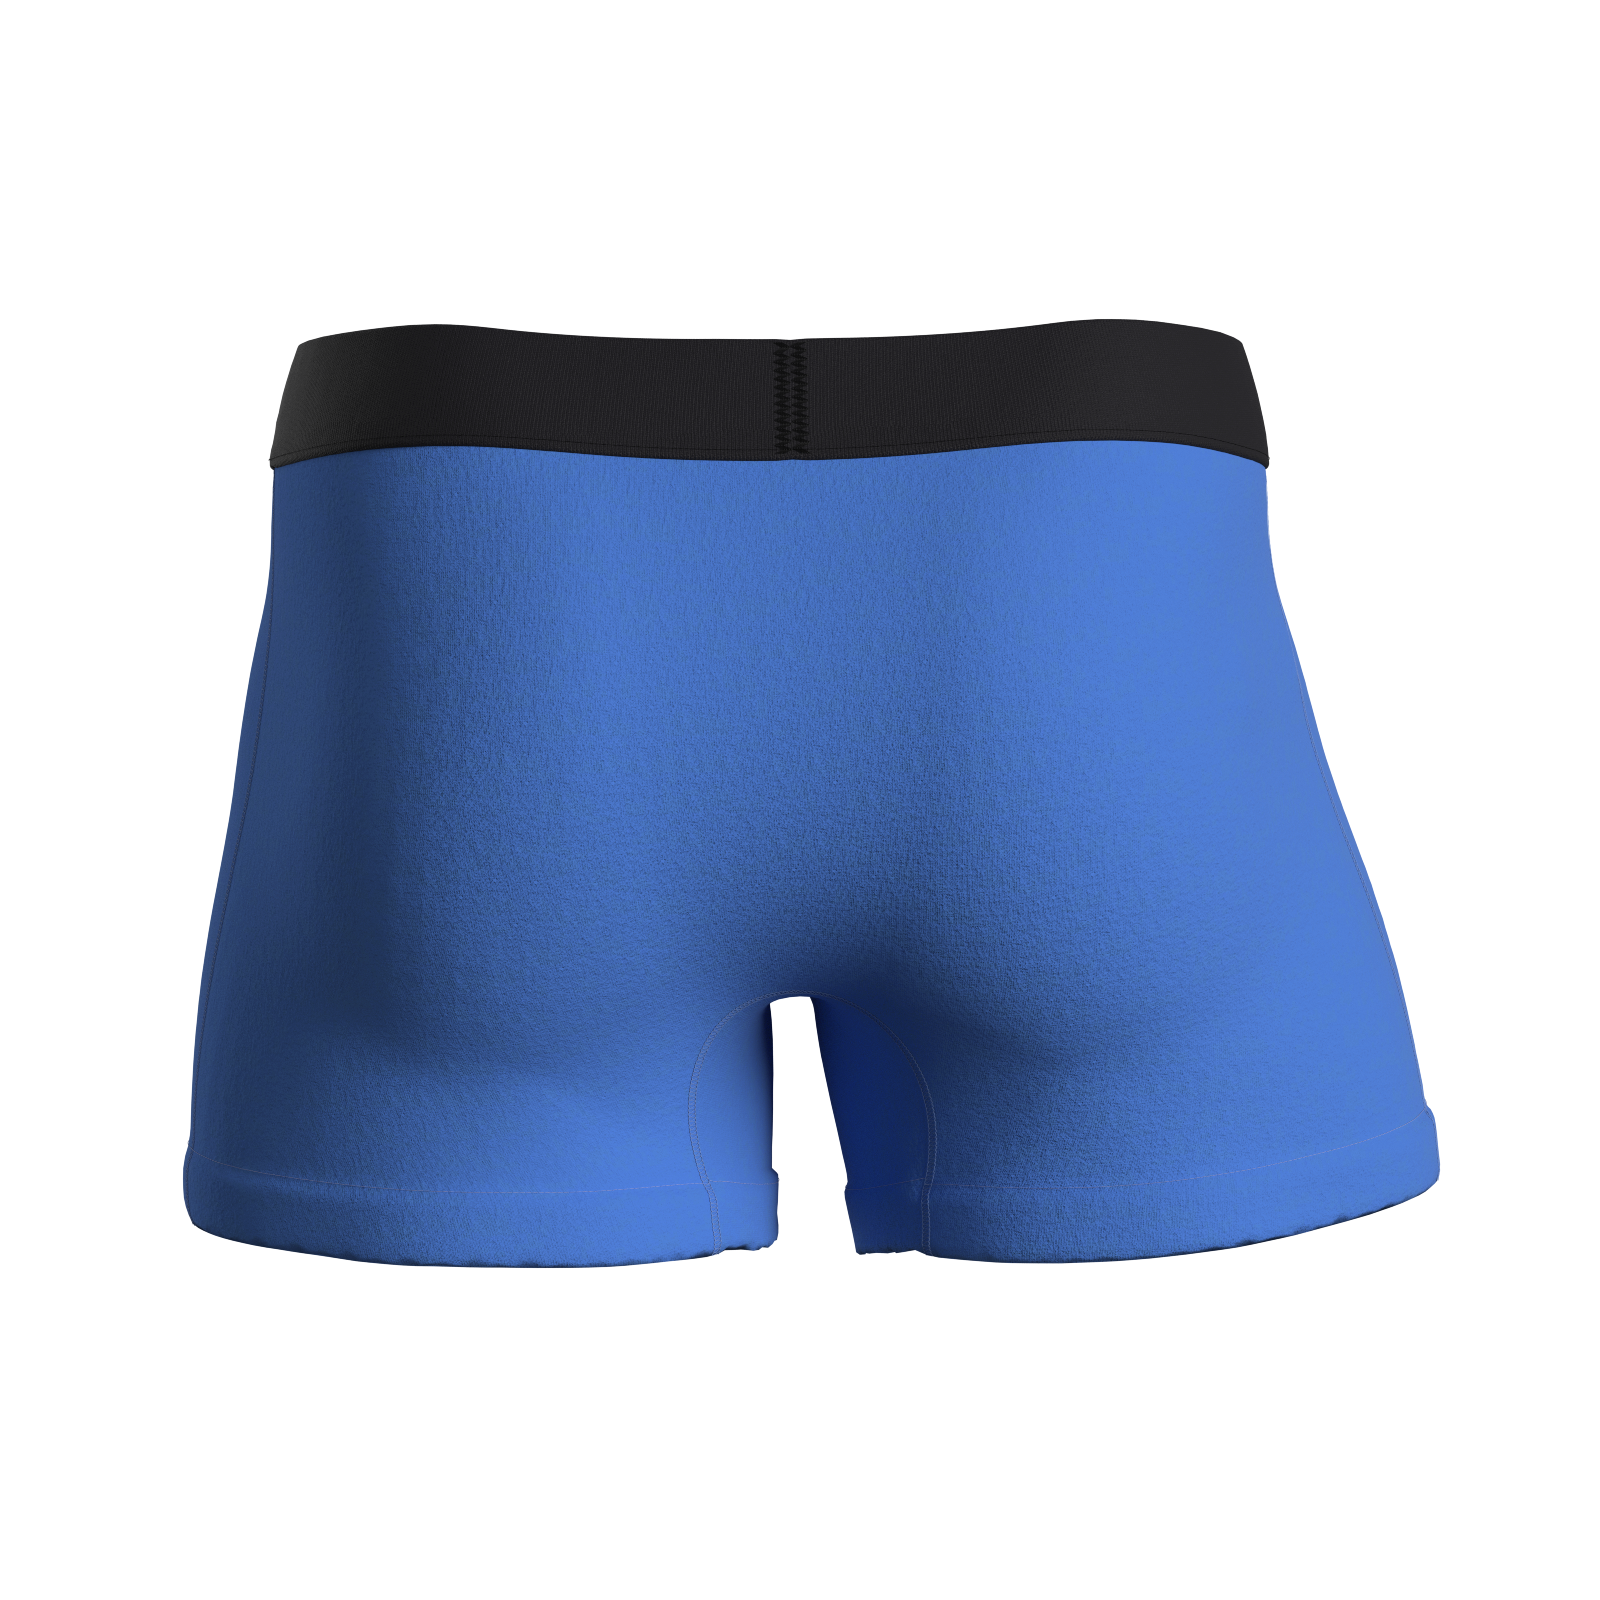 Underwear that Stops the Pee Spot  Eclectic Blue – Manley Barrier Apparel